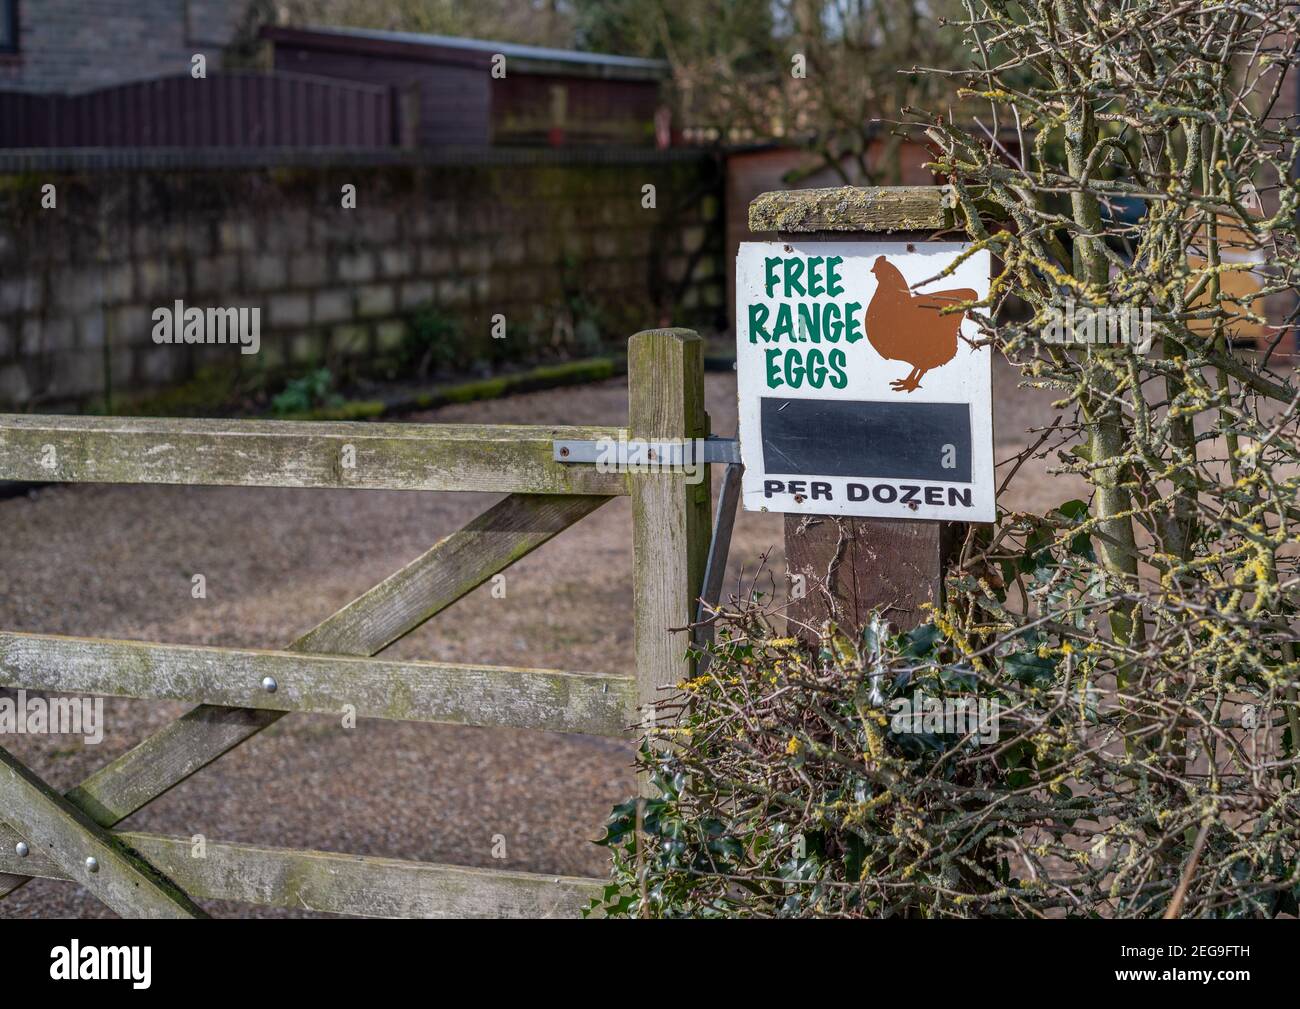 Small Free Range Eggs for sale sign on a wooden gate post in a rural setting. Stock Photo